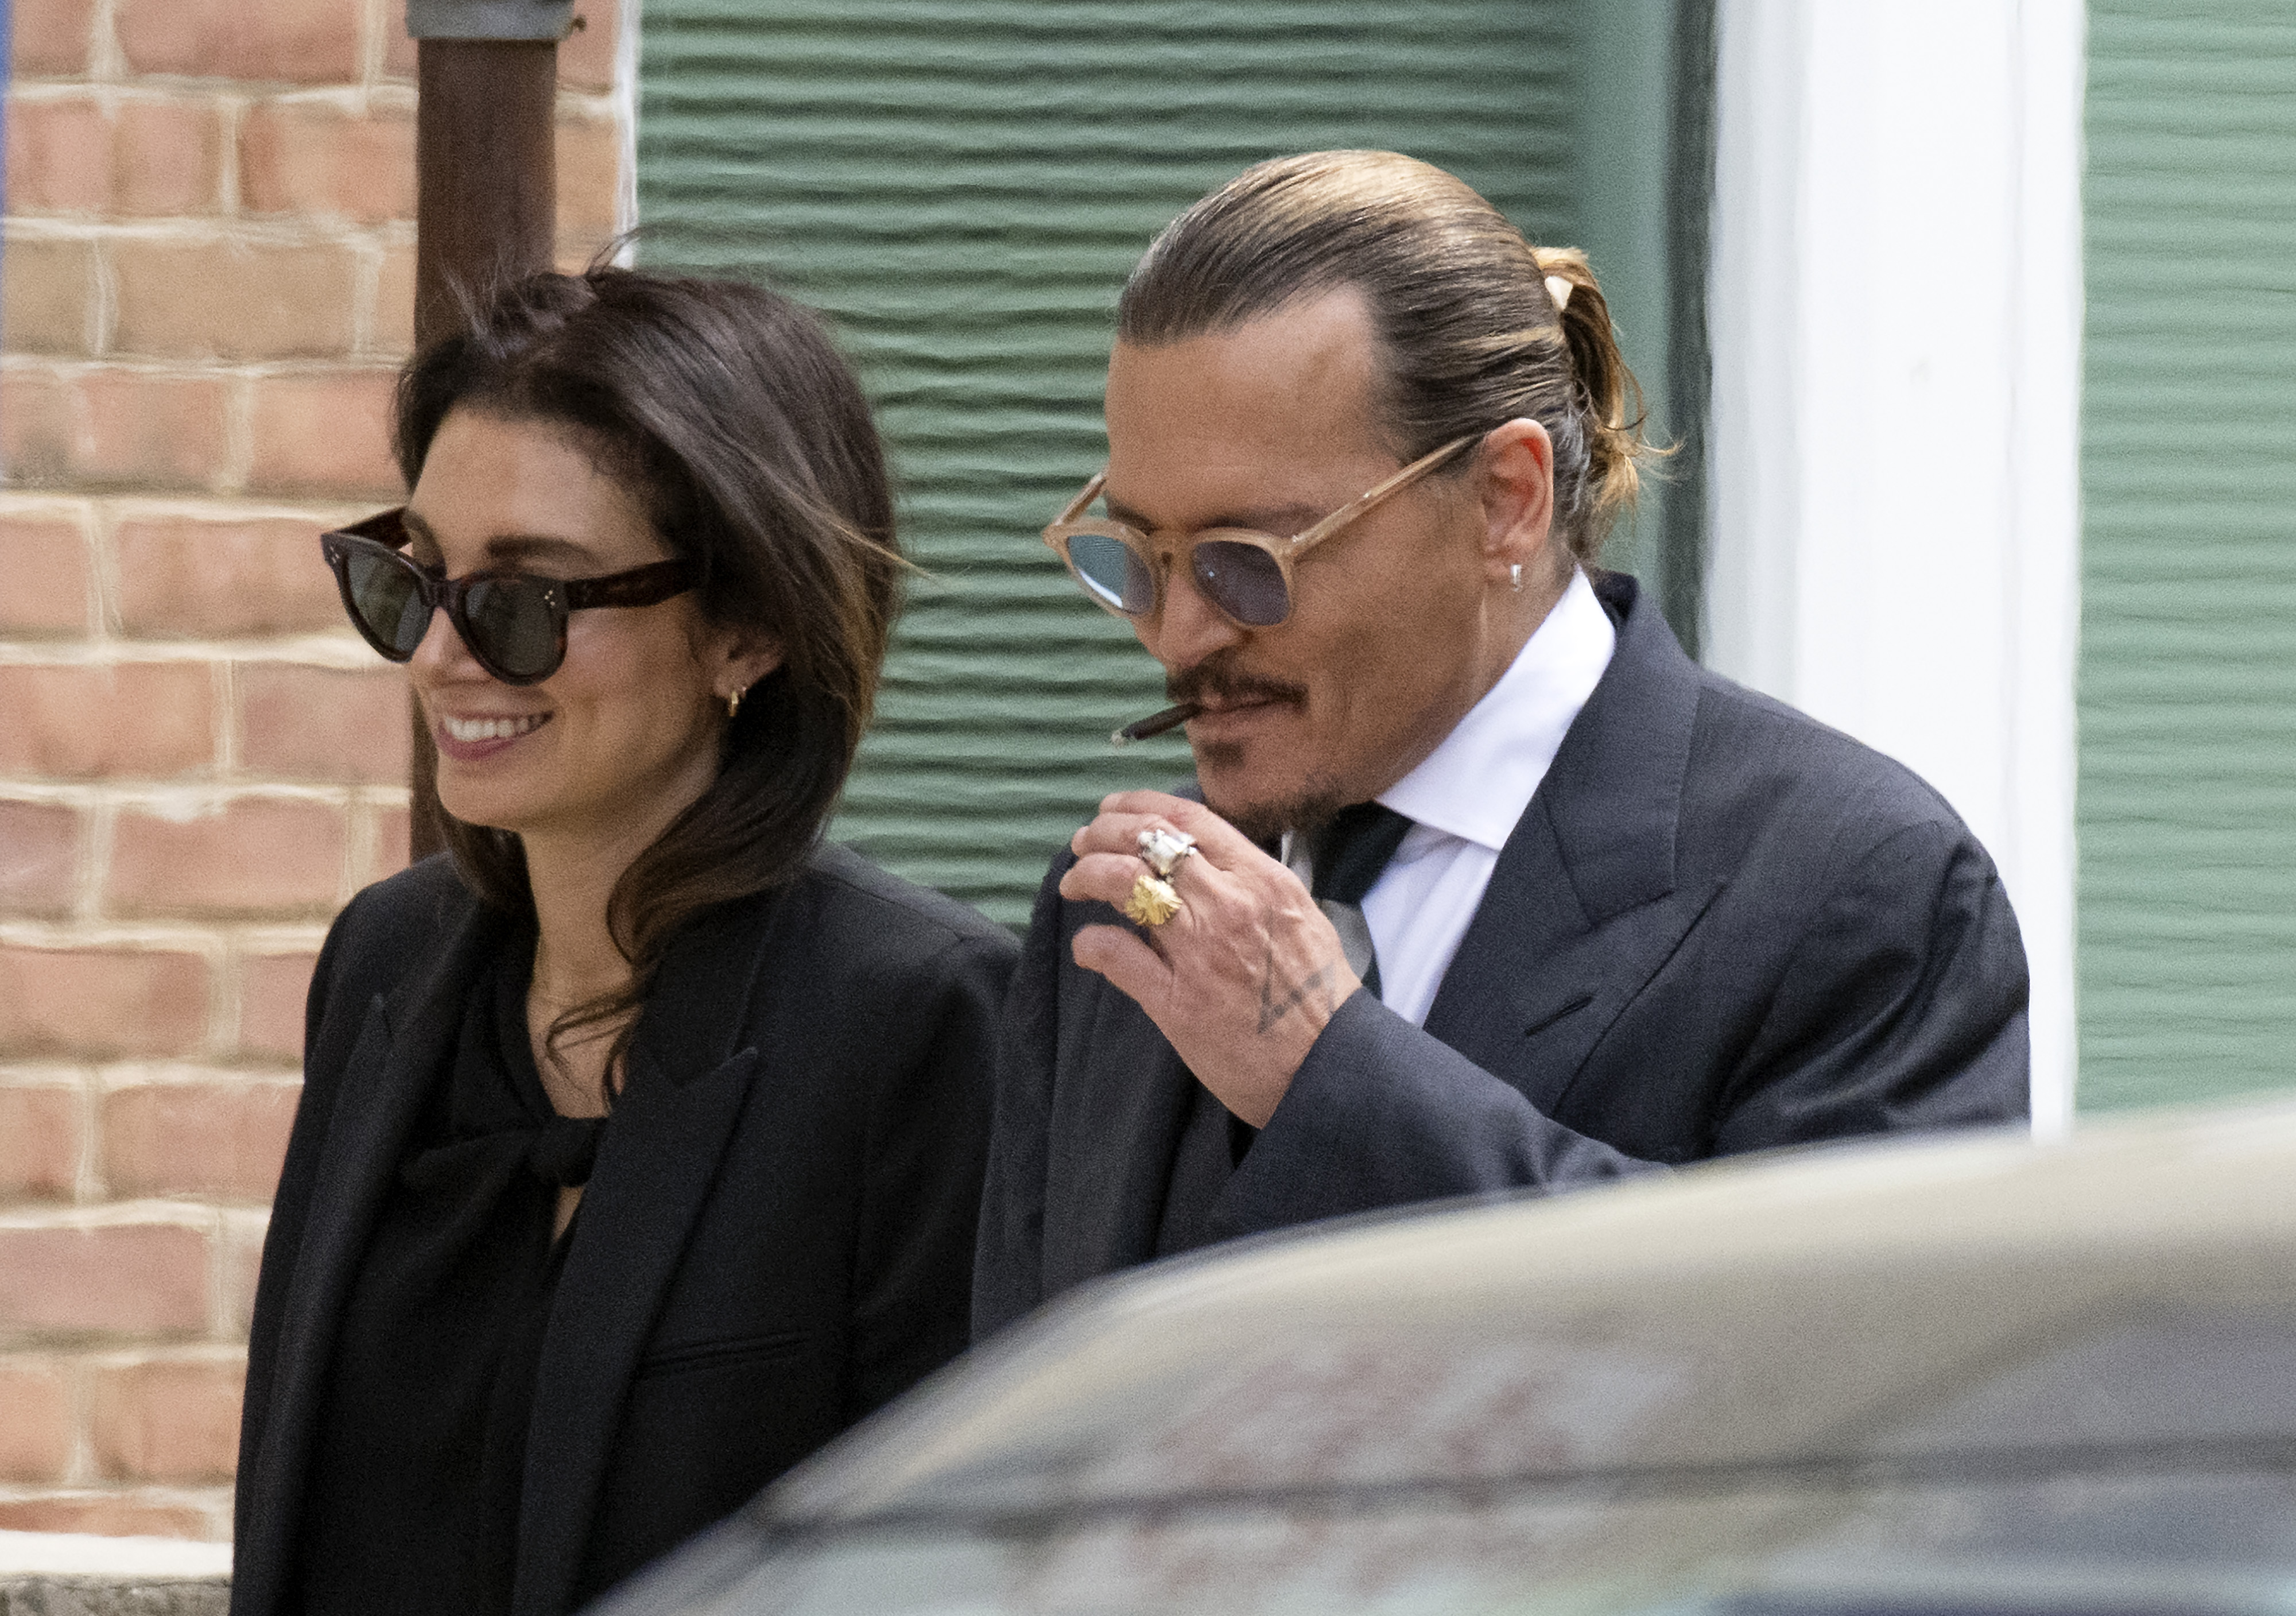 Joelle Rich and Johnny Depp outside court at Fairfax County Circuit Court on April 26, 2022 in Fairfax, Virginia | Source: Getty Images